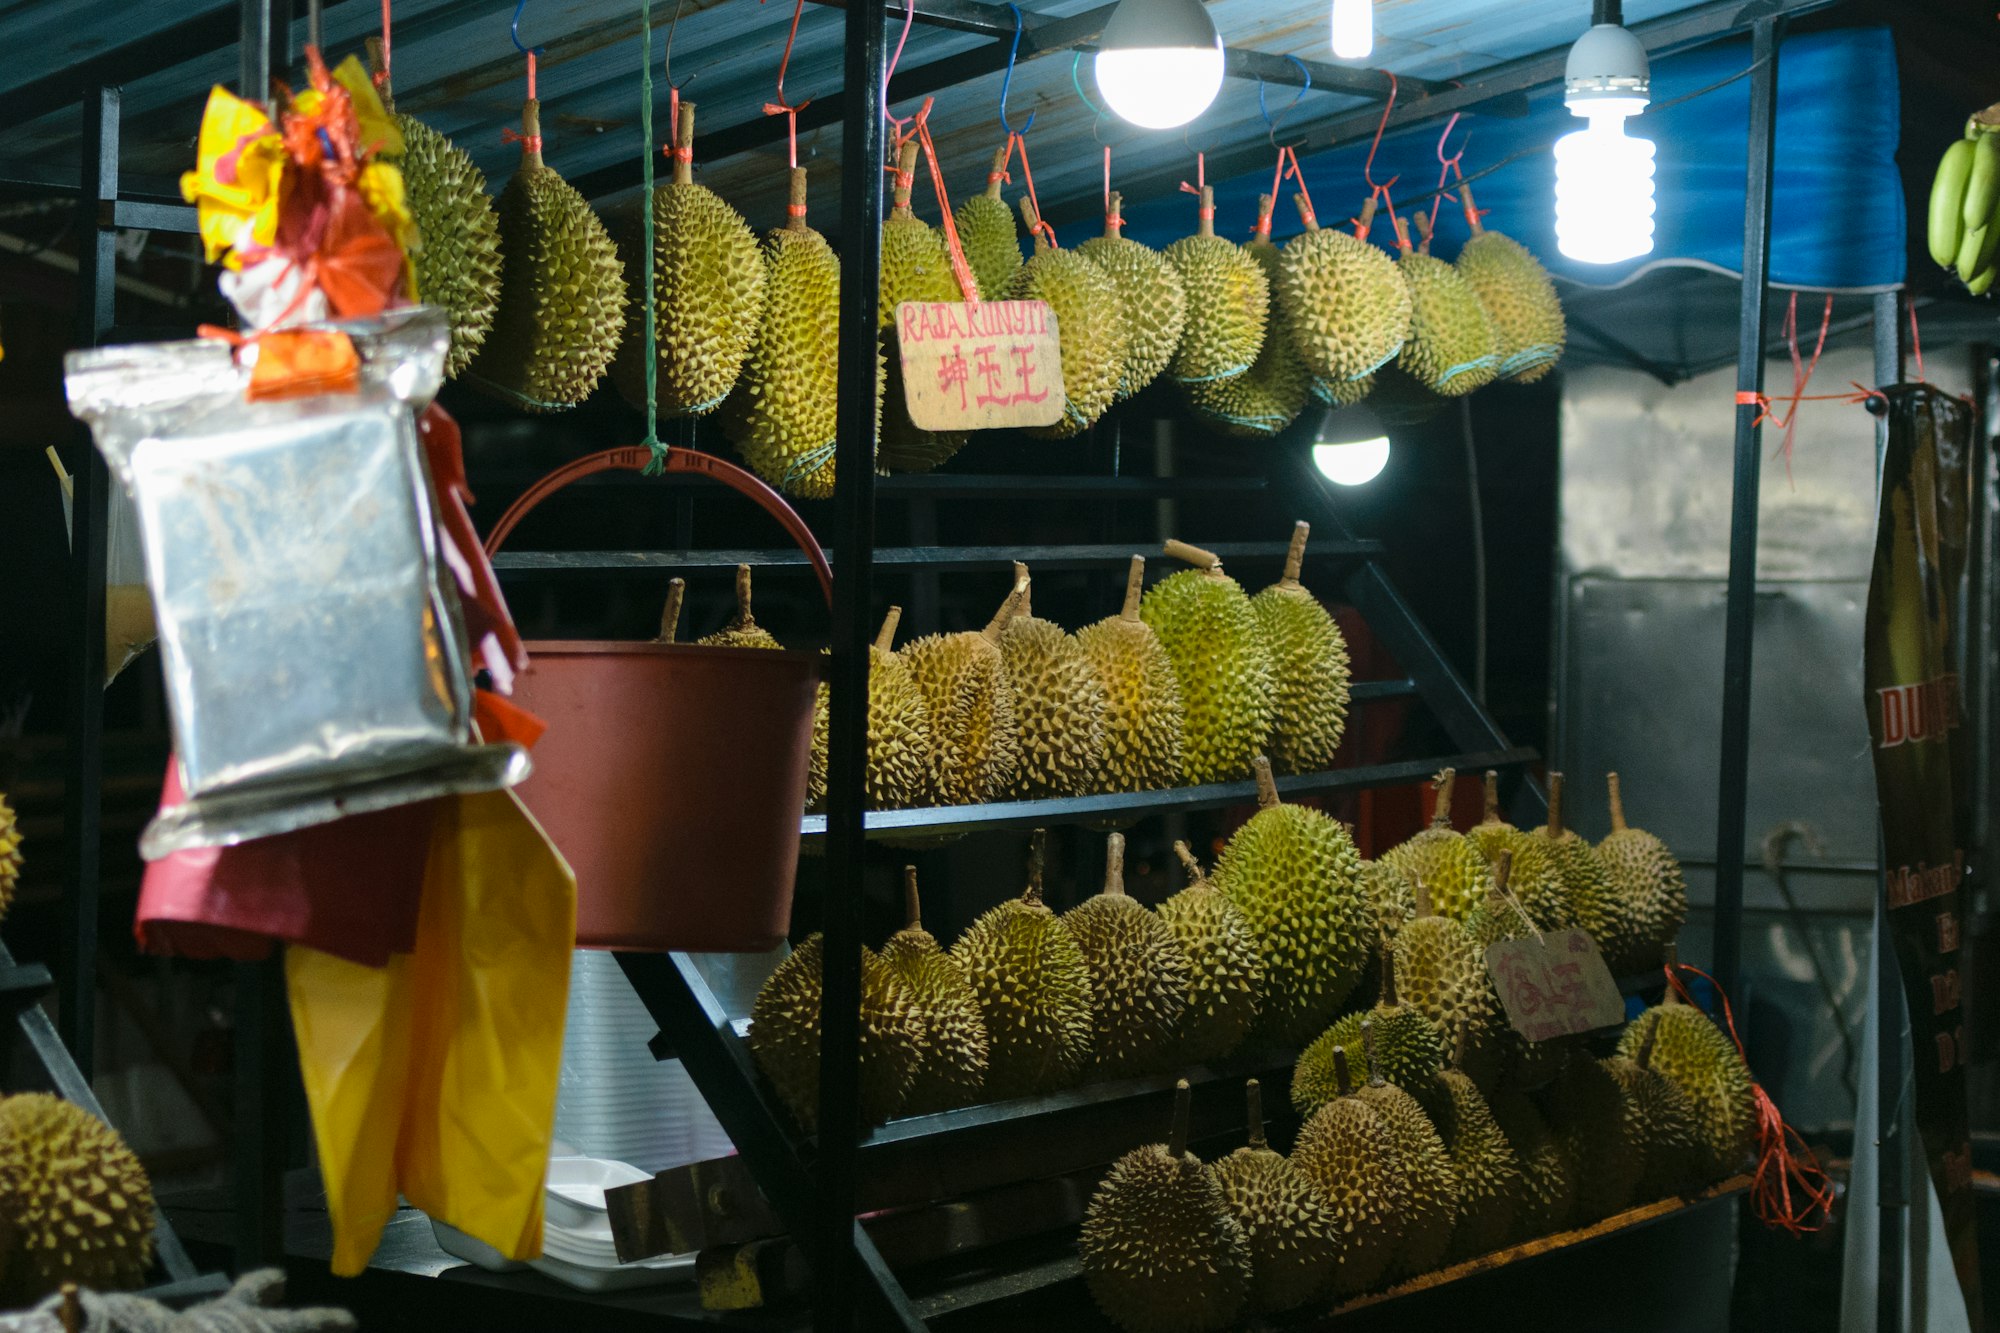 A market stand selling a variety of Durian fruits at night in Kuala Lumpur, Malaysia